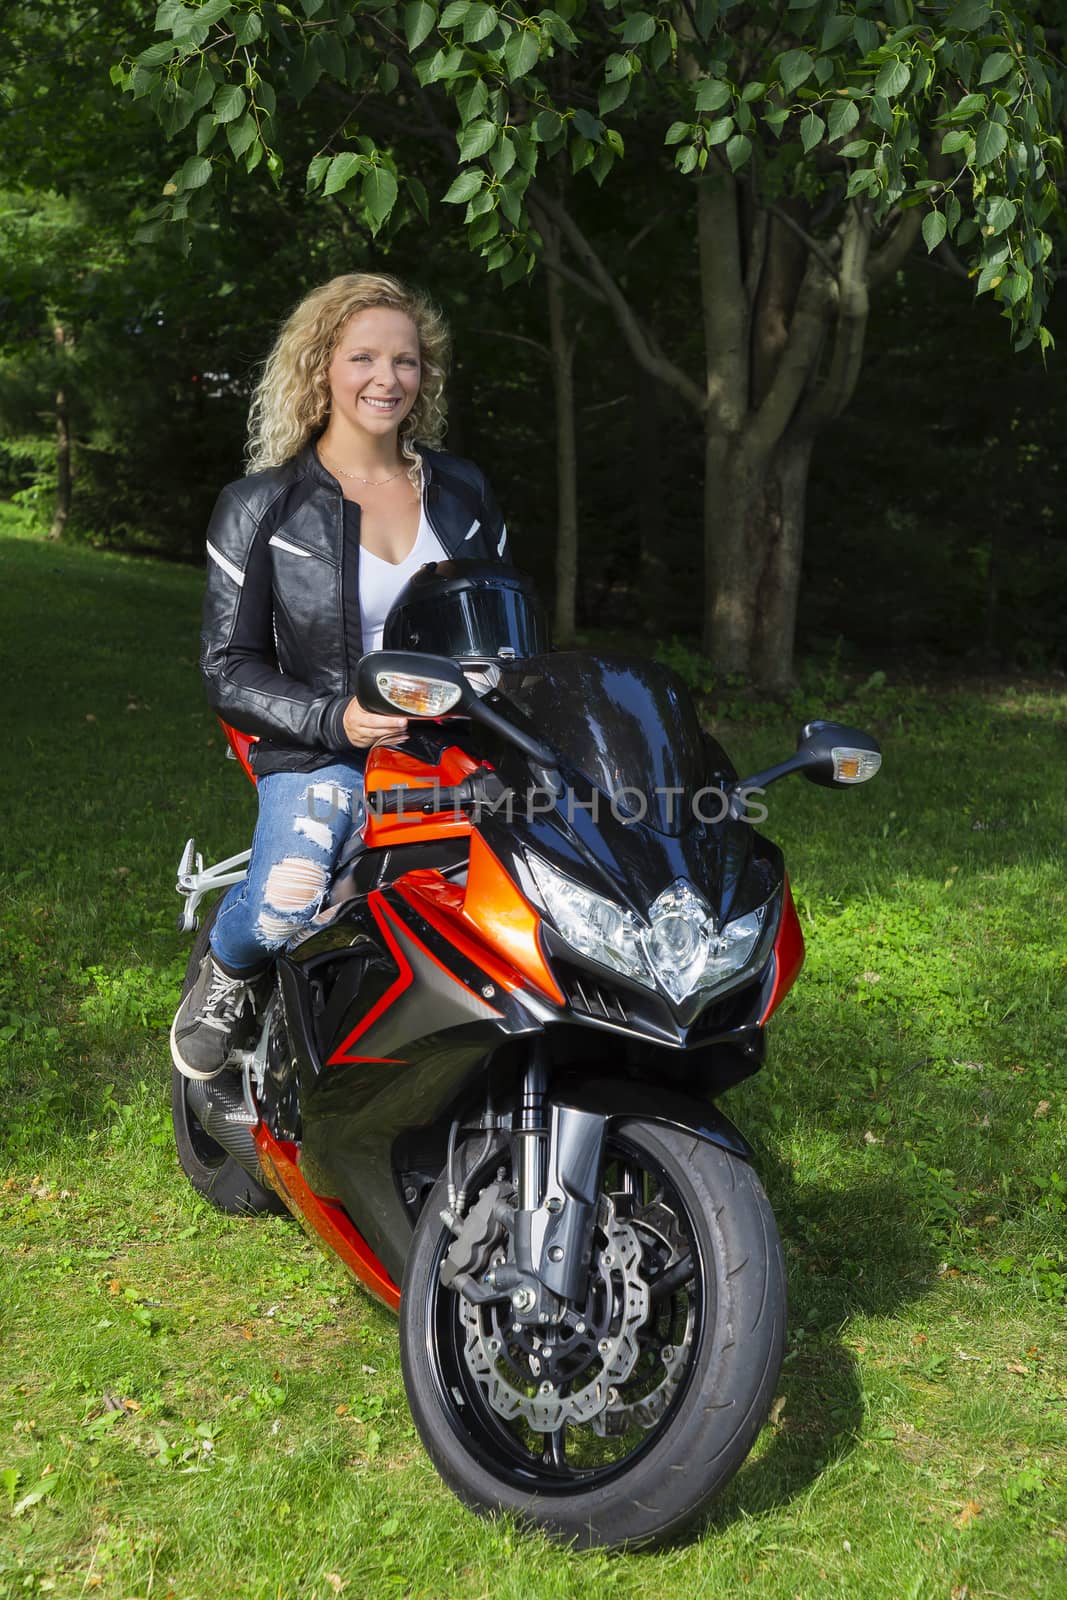 Blond woman, in her twenties, sitting on top of a sport motocycle, in a park